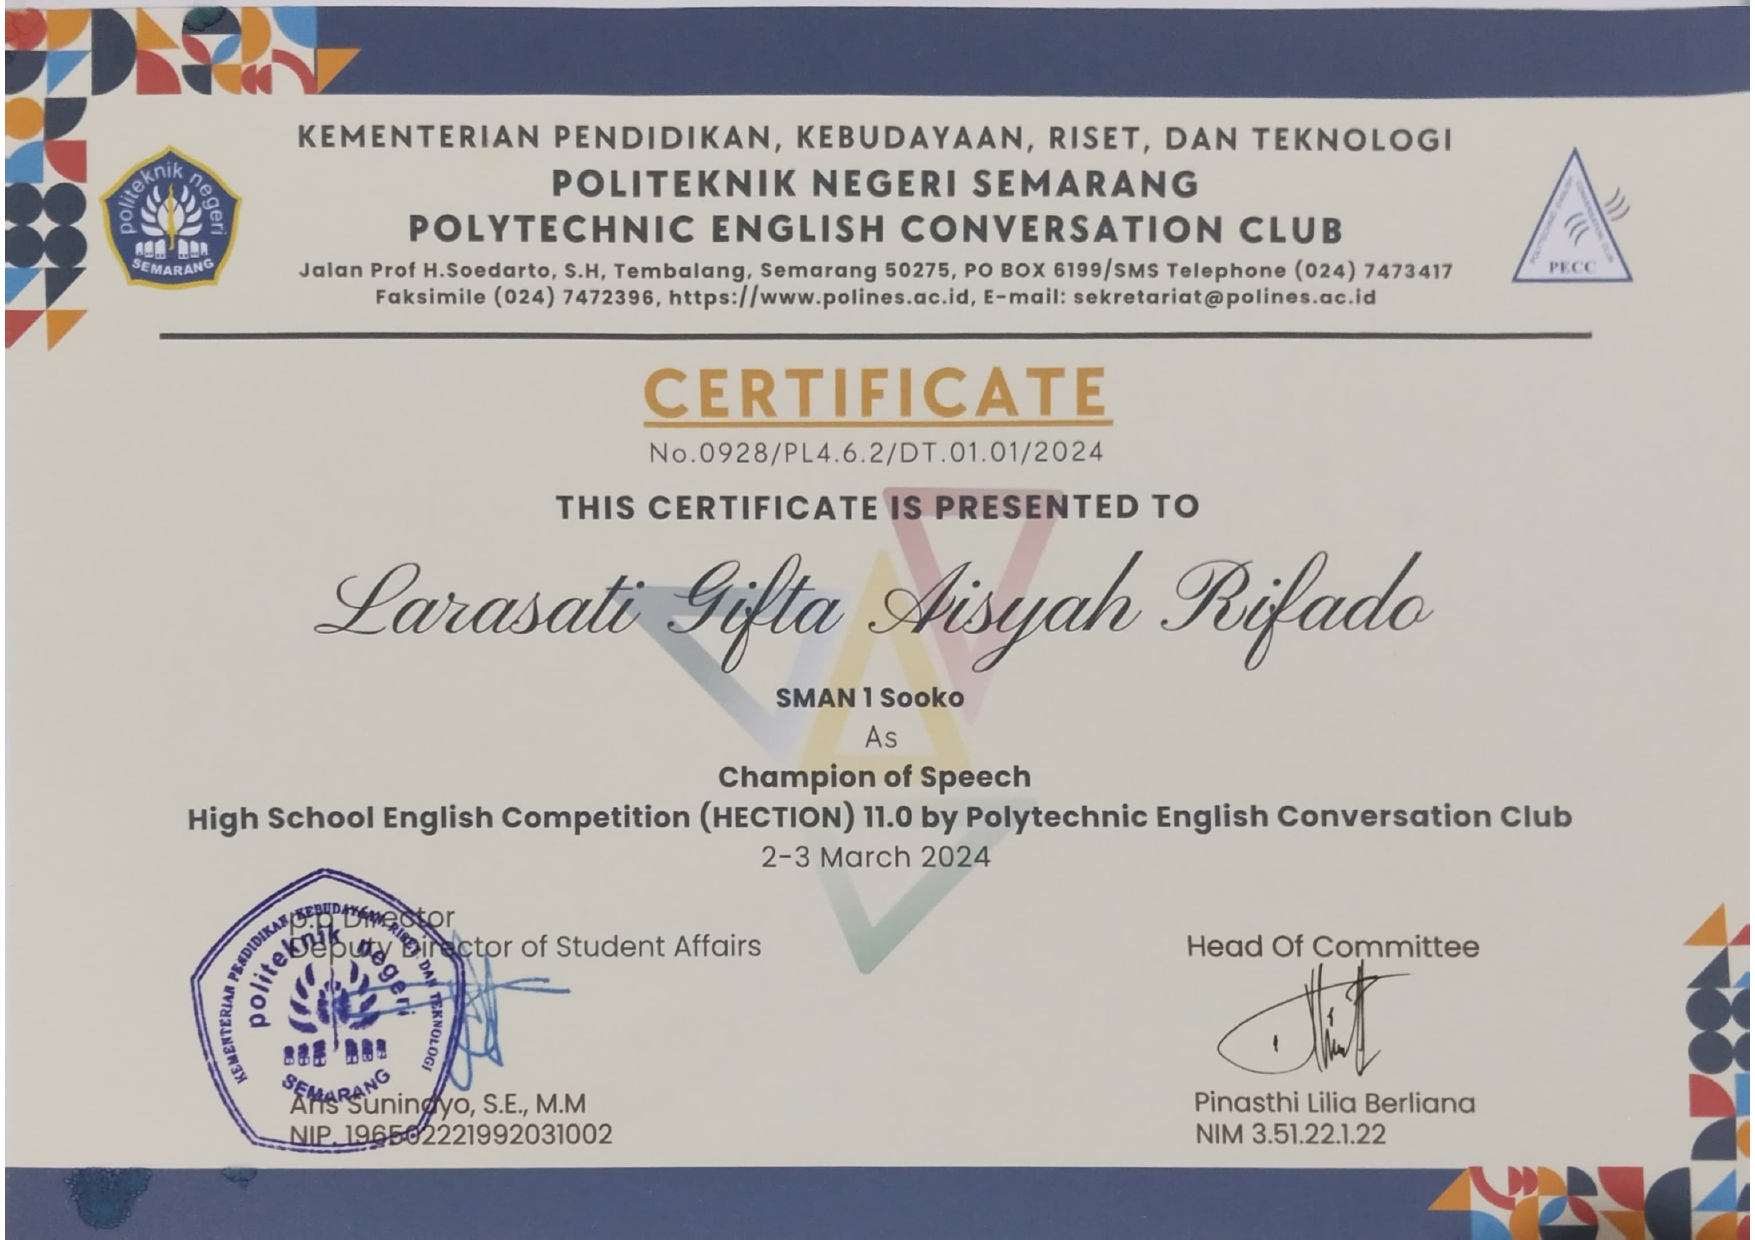 HIGH SCHOOL ENGLISH COMPETITION (HECTION)